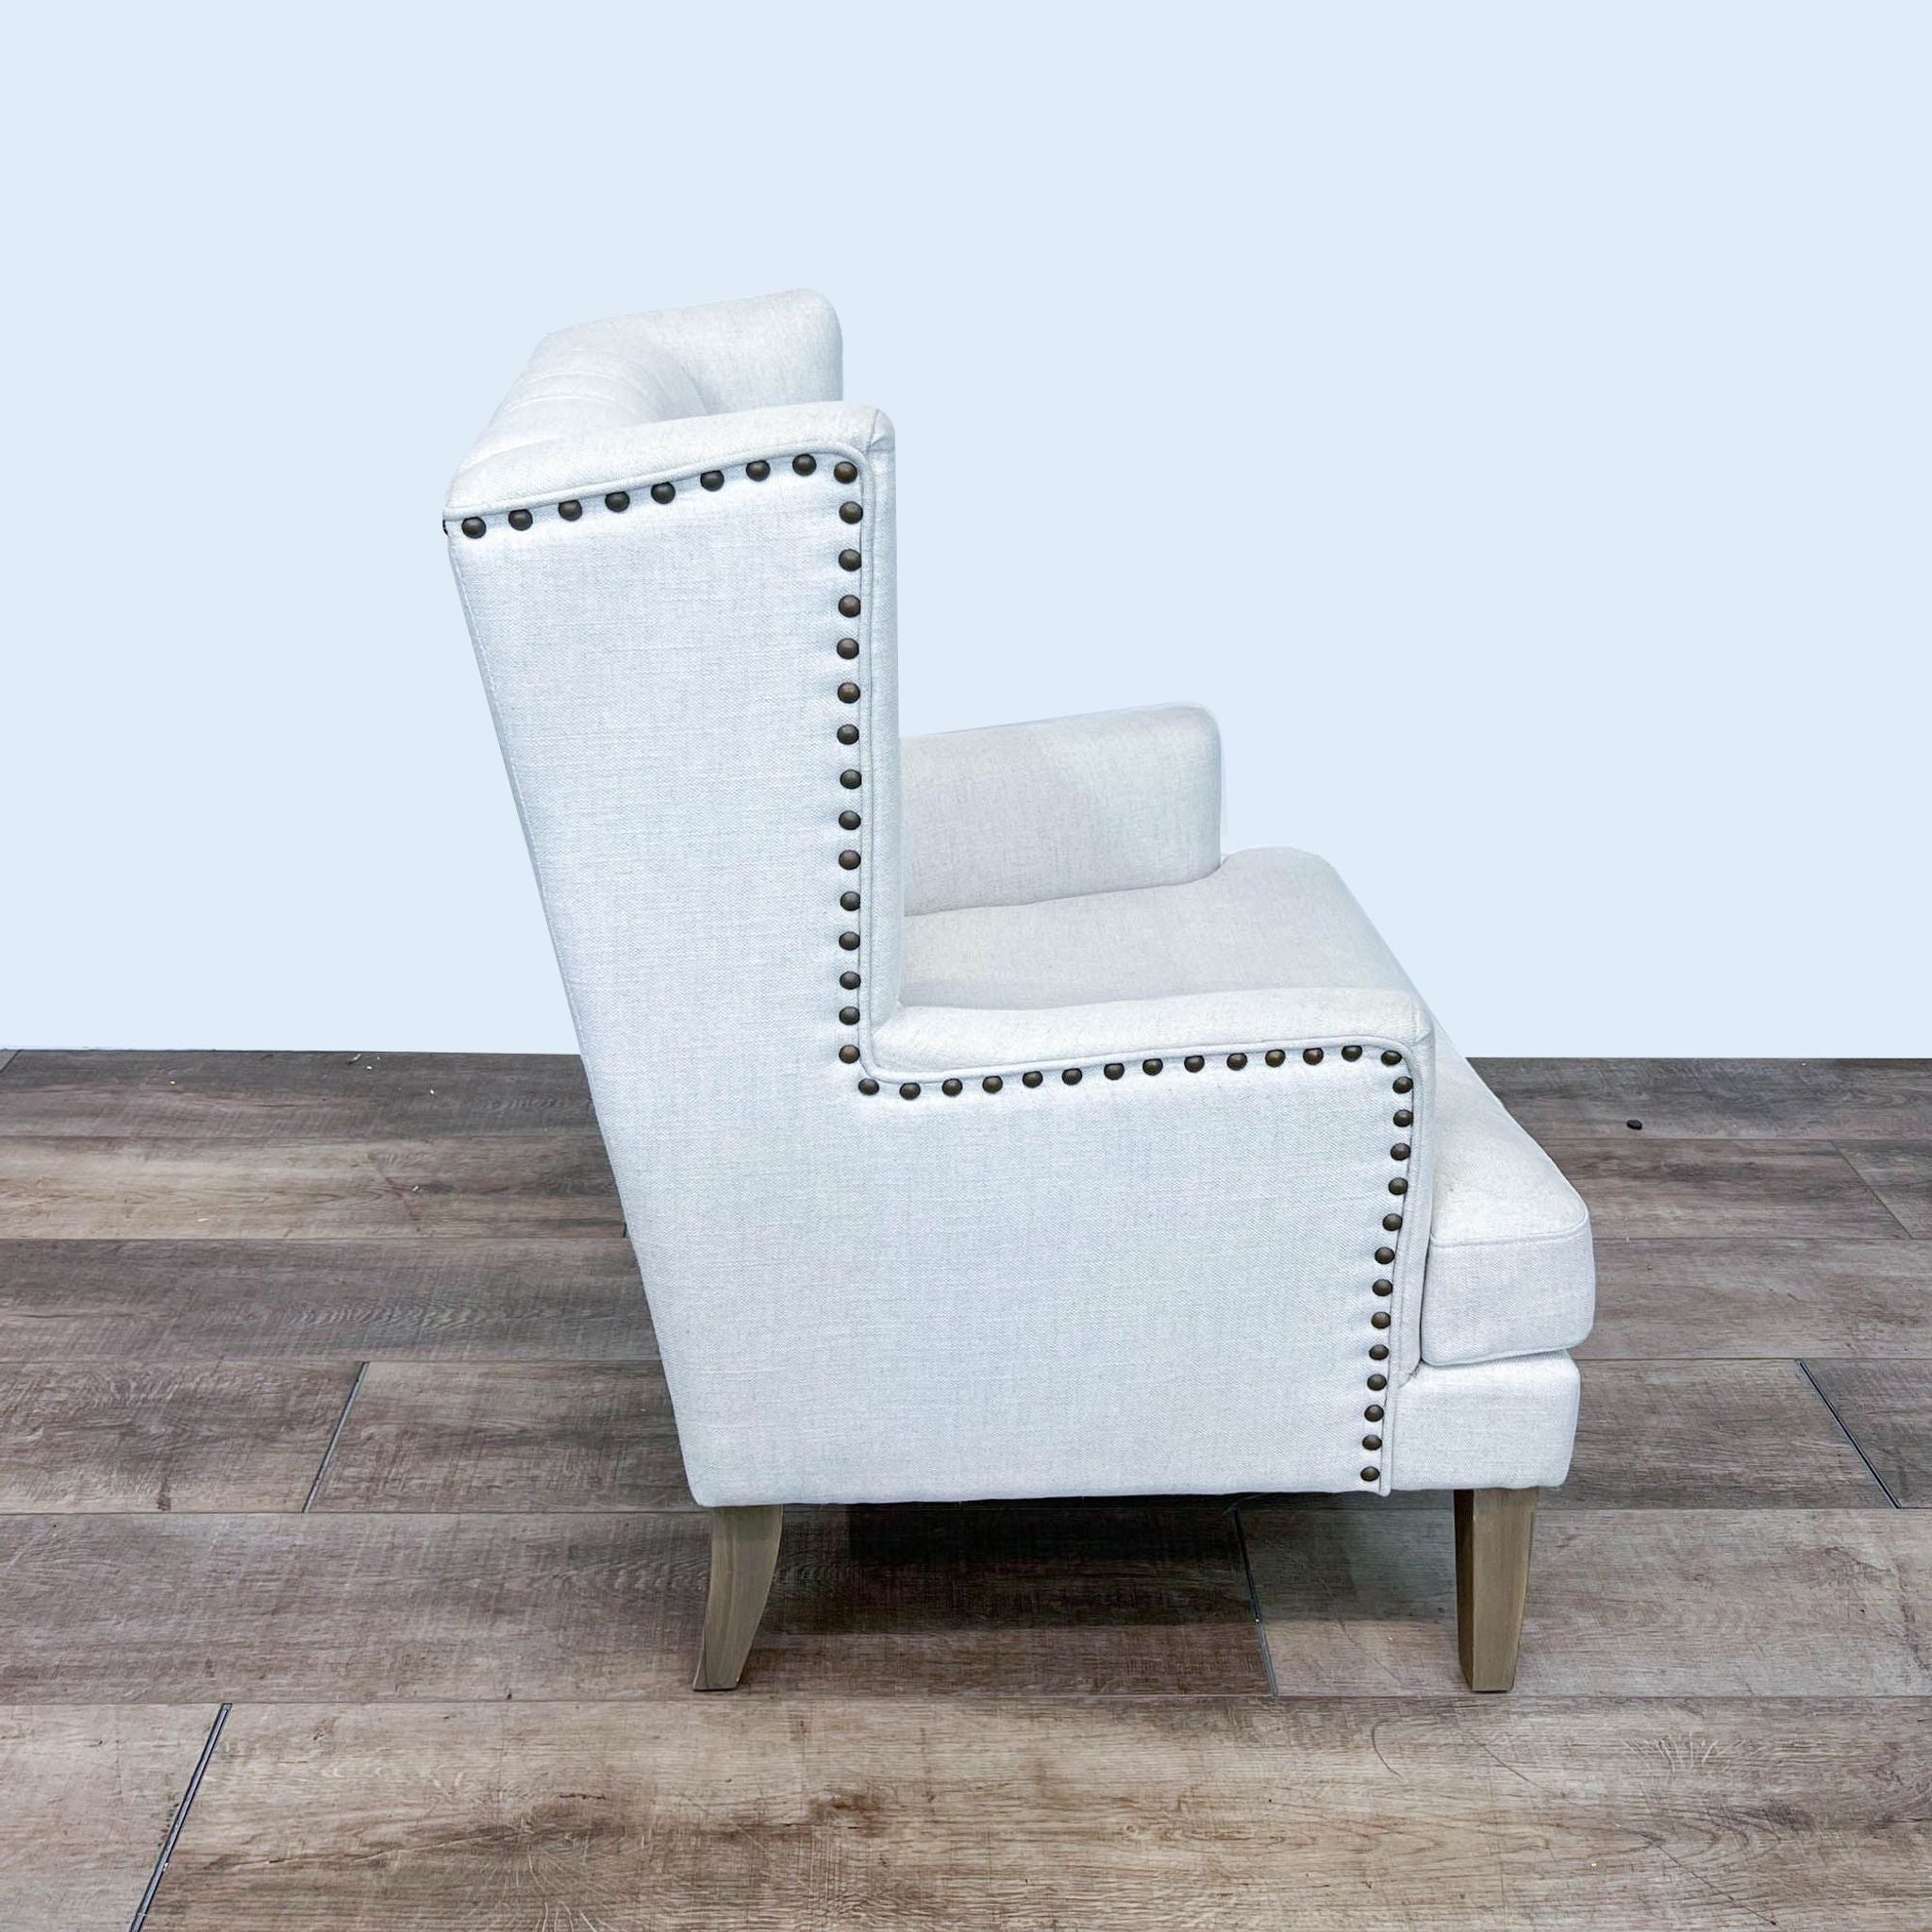 Textured fabric upholstered Arhaus lounge chair with tufted backrest and nailhead trim, showcasing tapered wood legs.